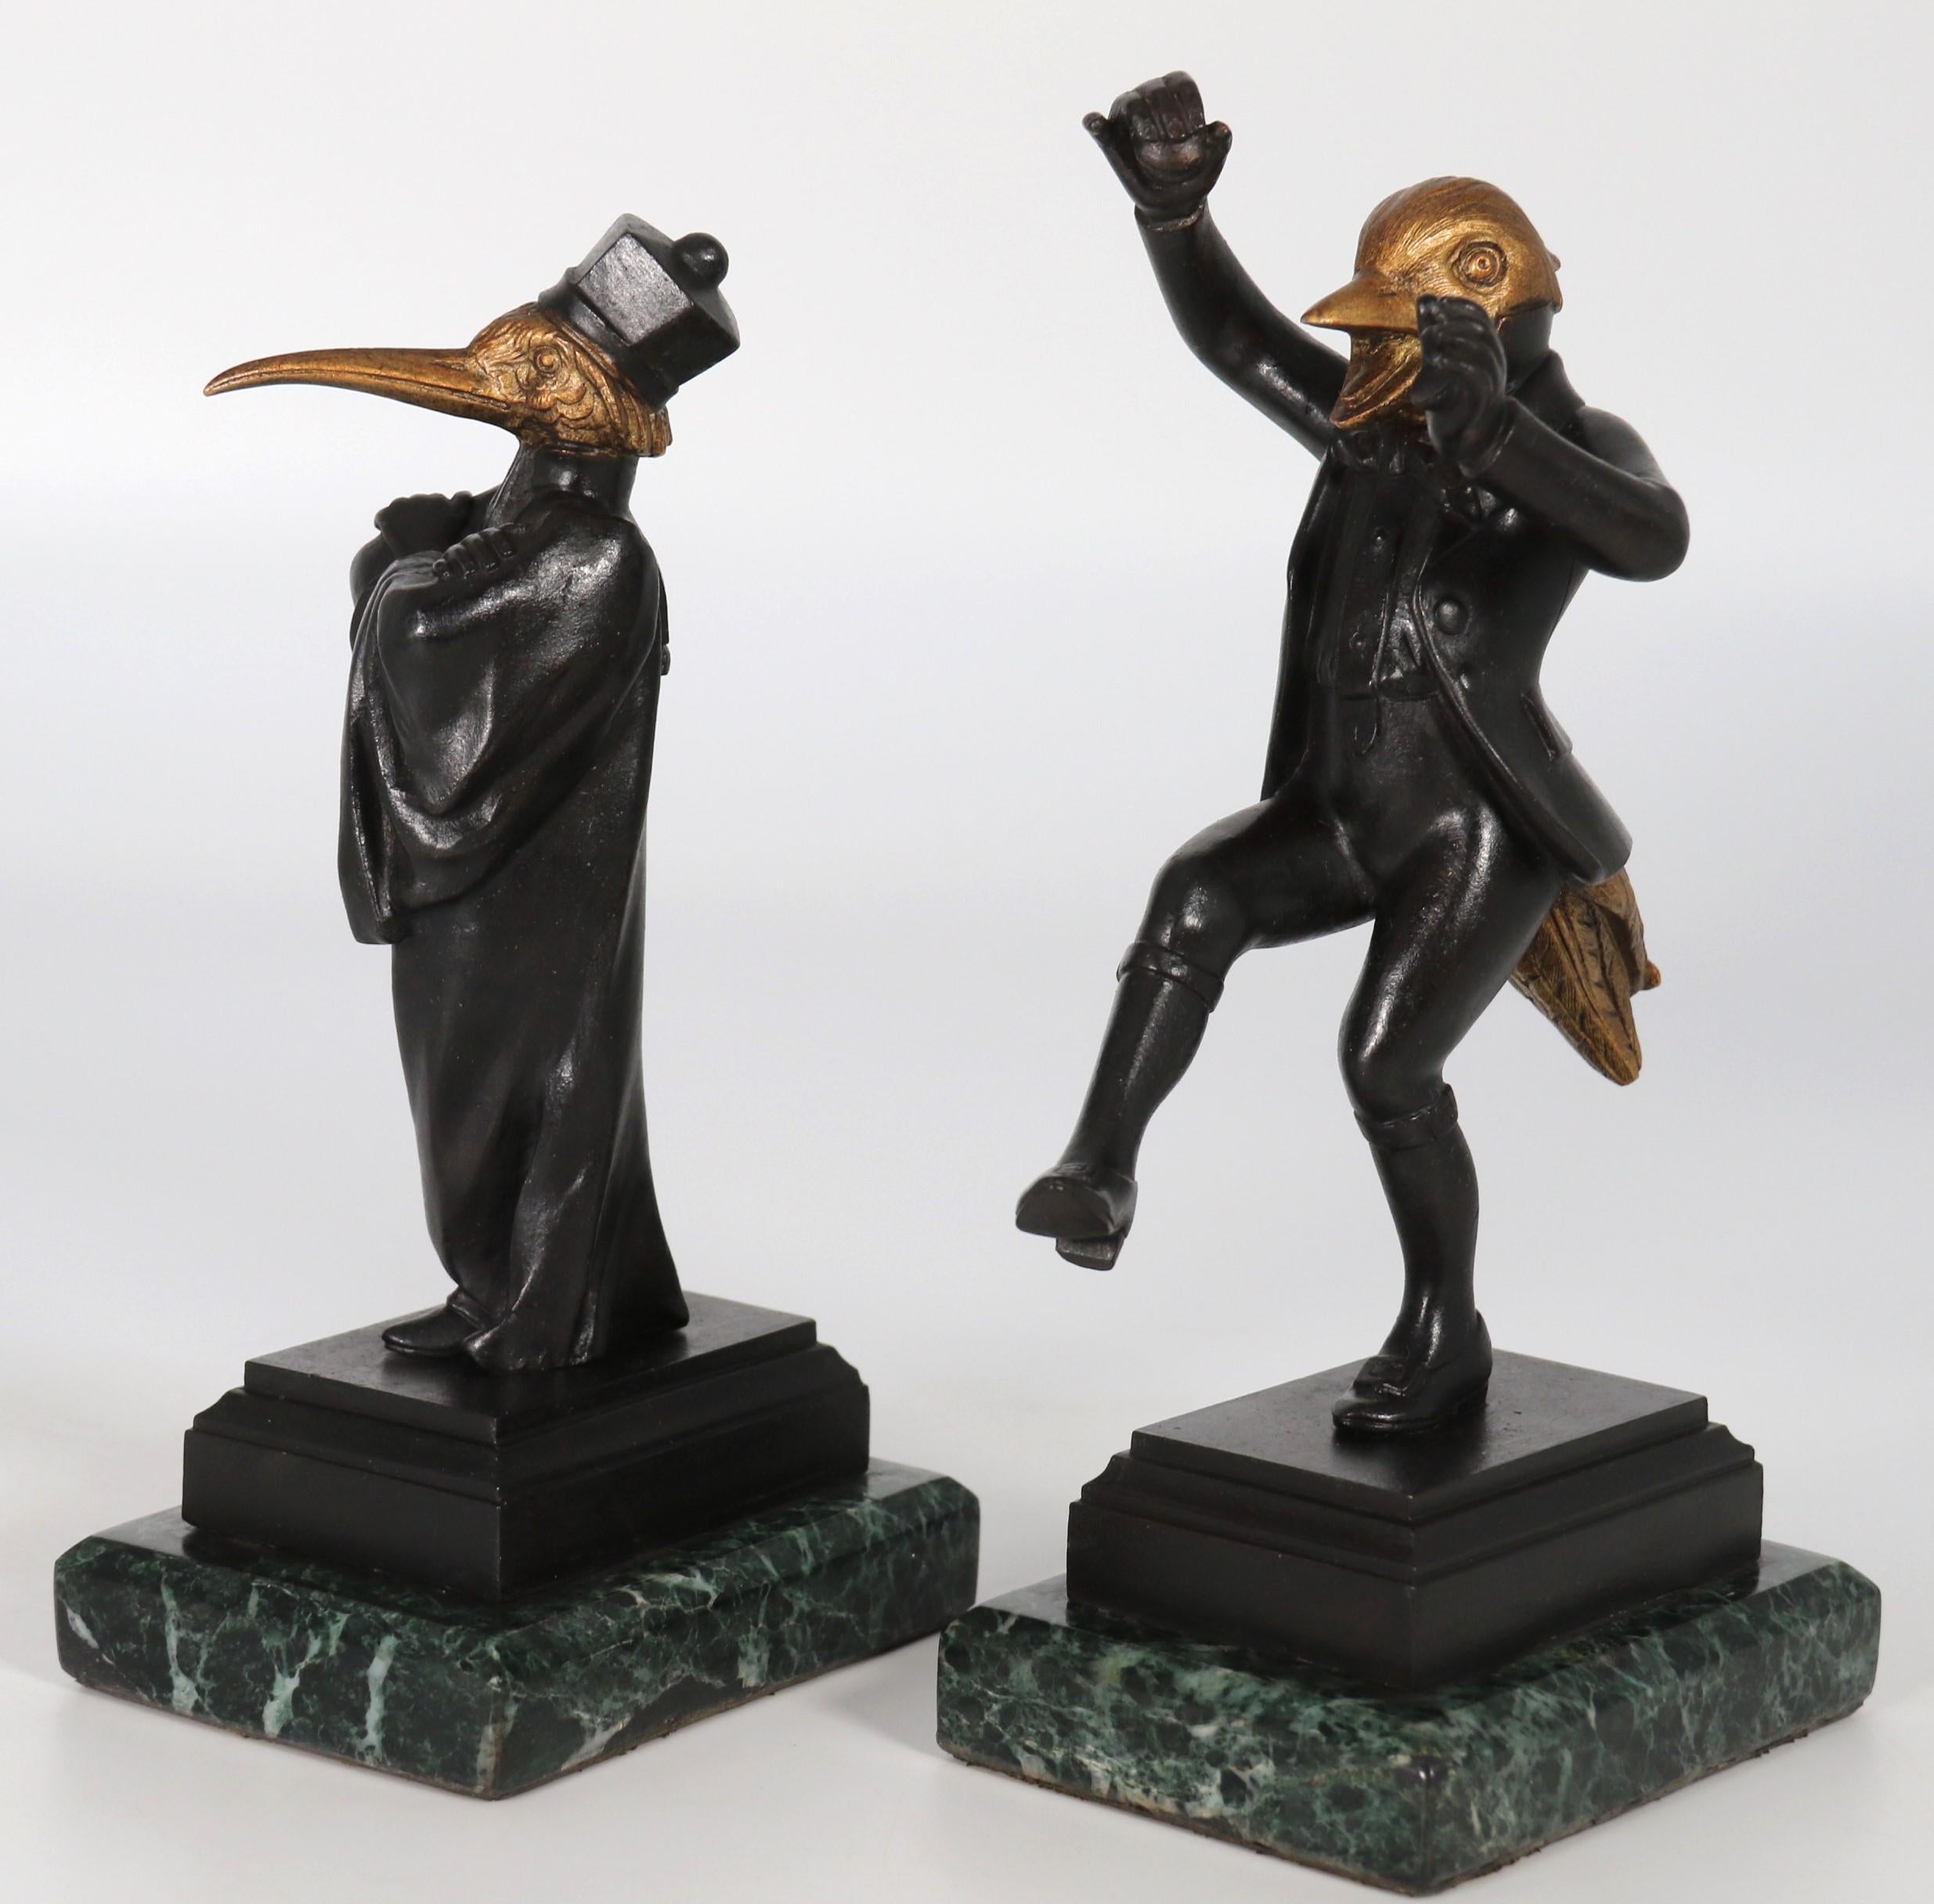 A most unusual pair of late 19th century bronze figures depicting caricatures of a heron and mallard duck, each with human bodies including torso, legs and arms,  and tail feathers with a bird head, each figure is dressed in theatrical costume